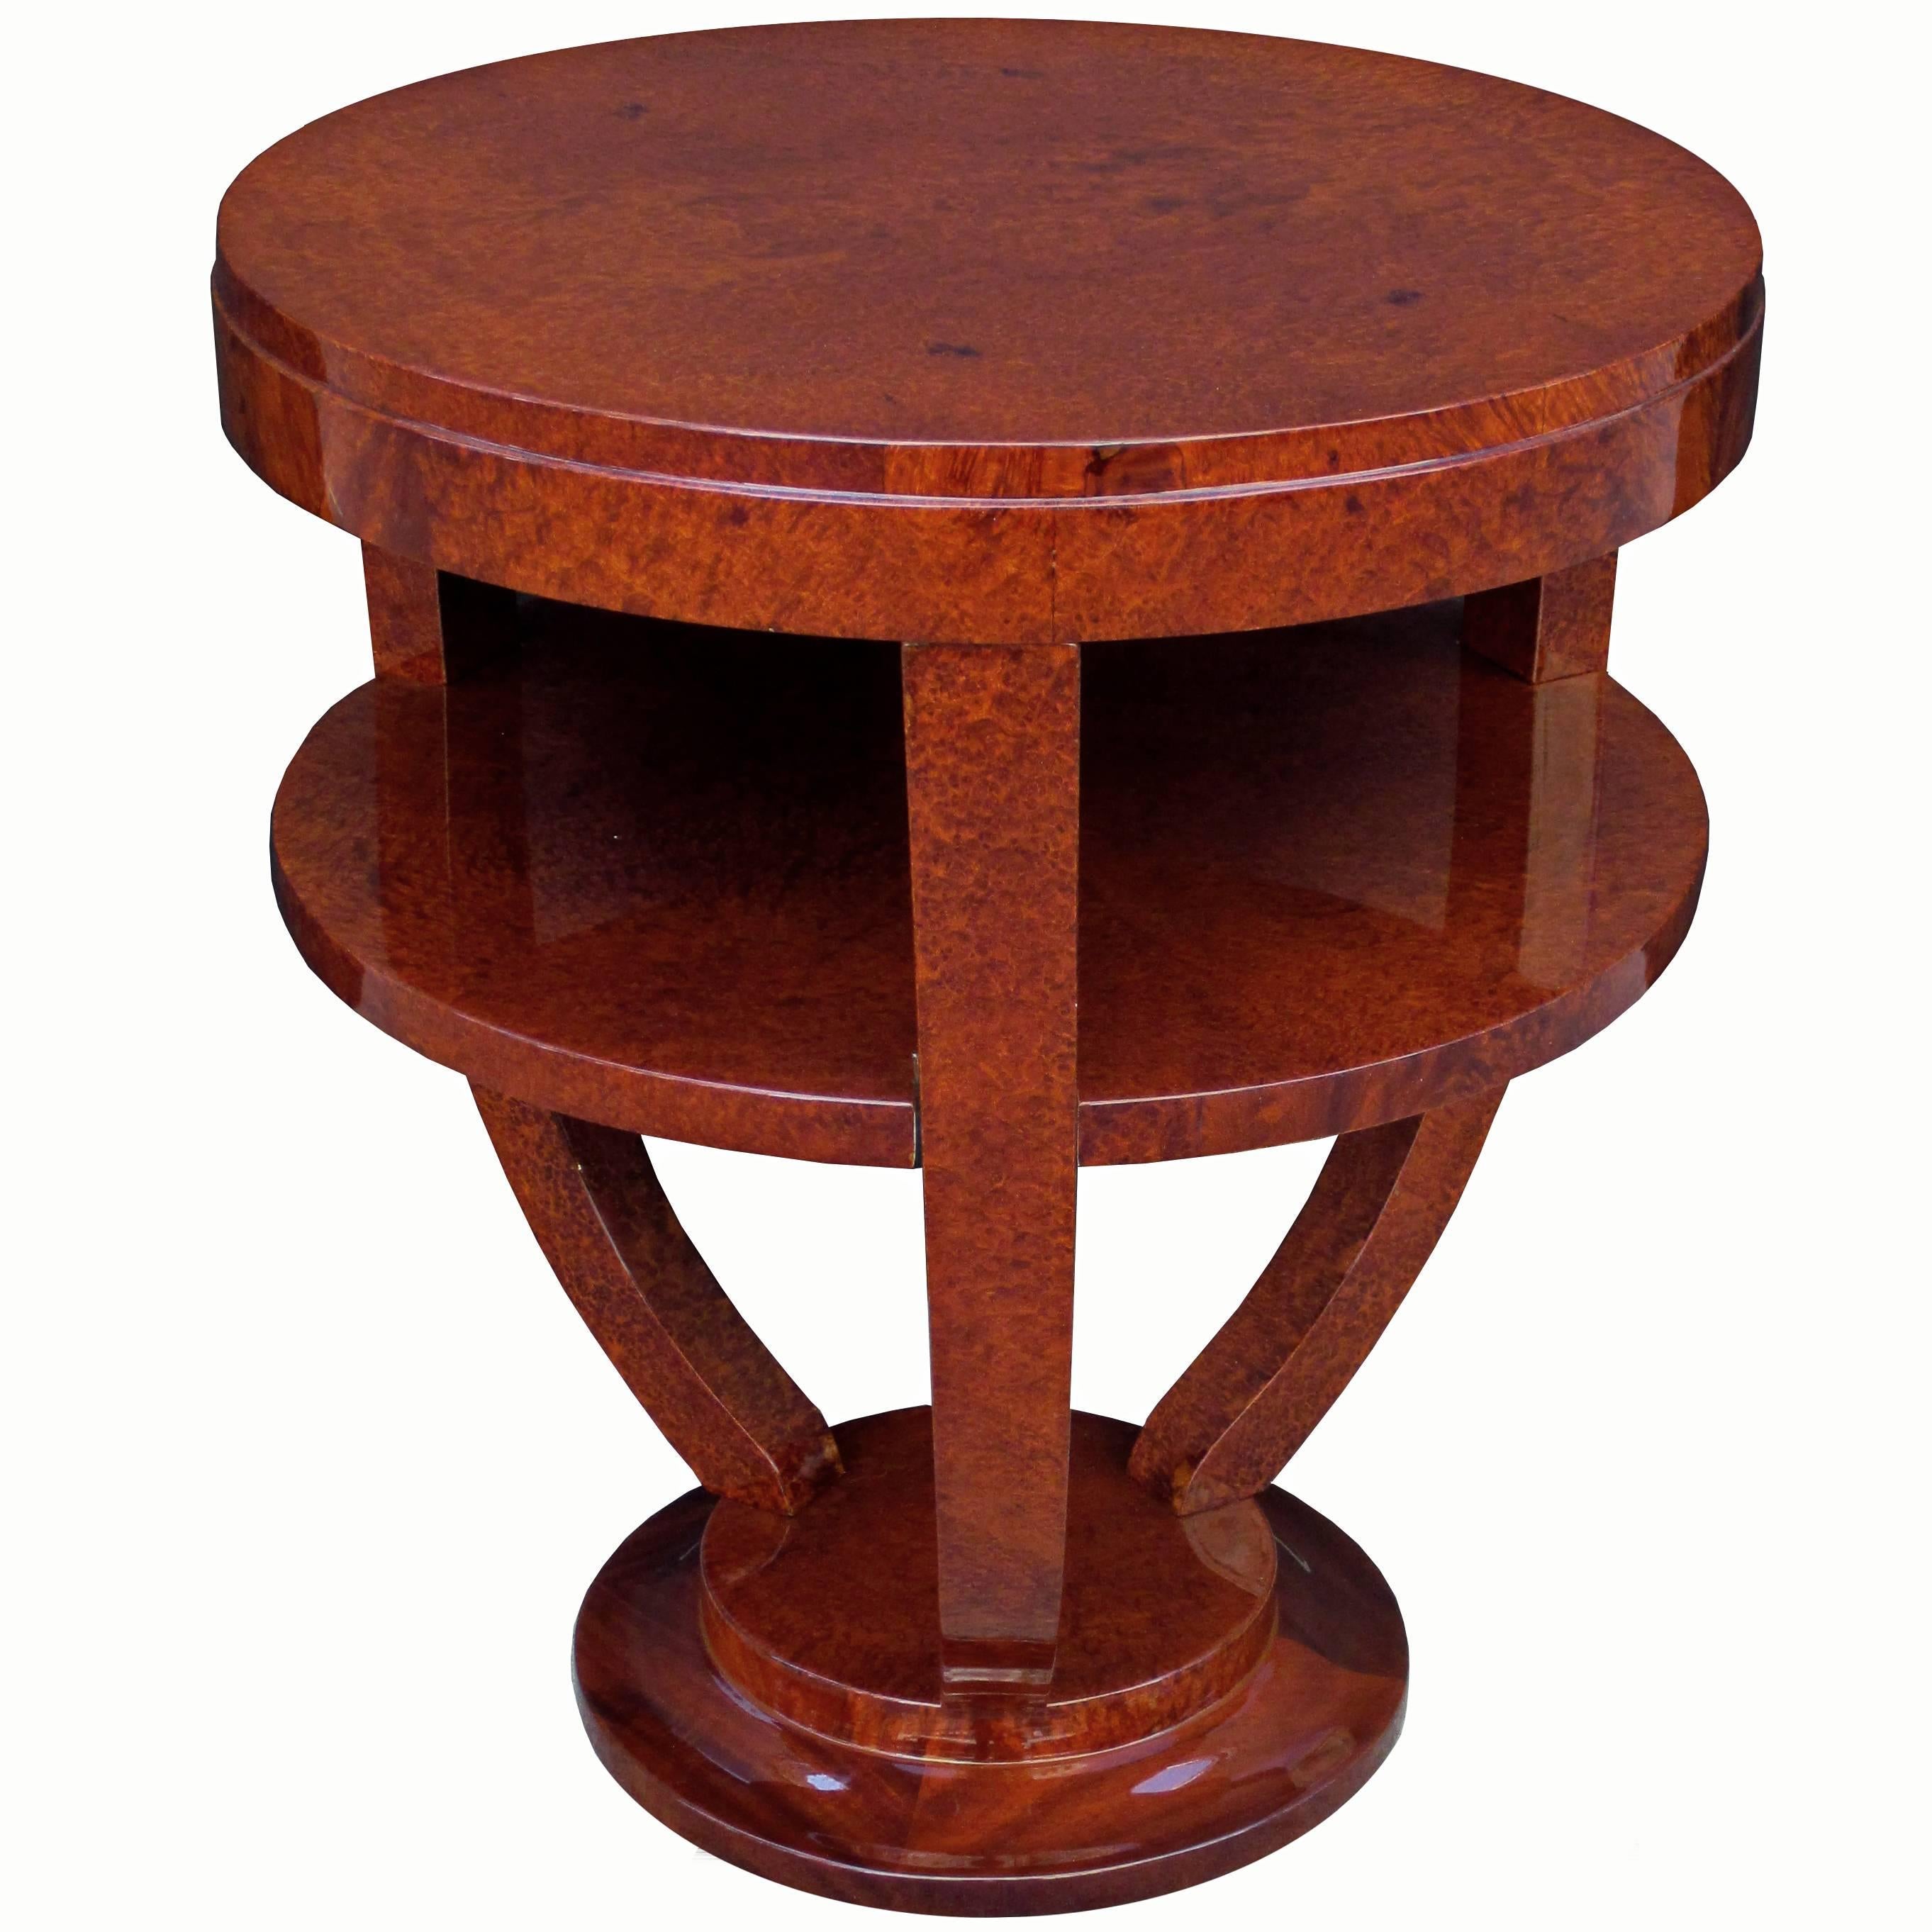 Single Art Deco Two-Tier Round Side Table